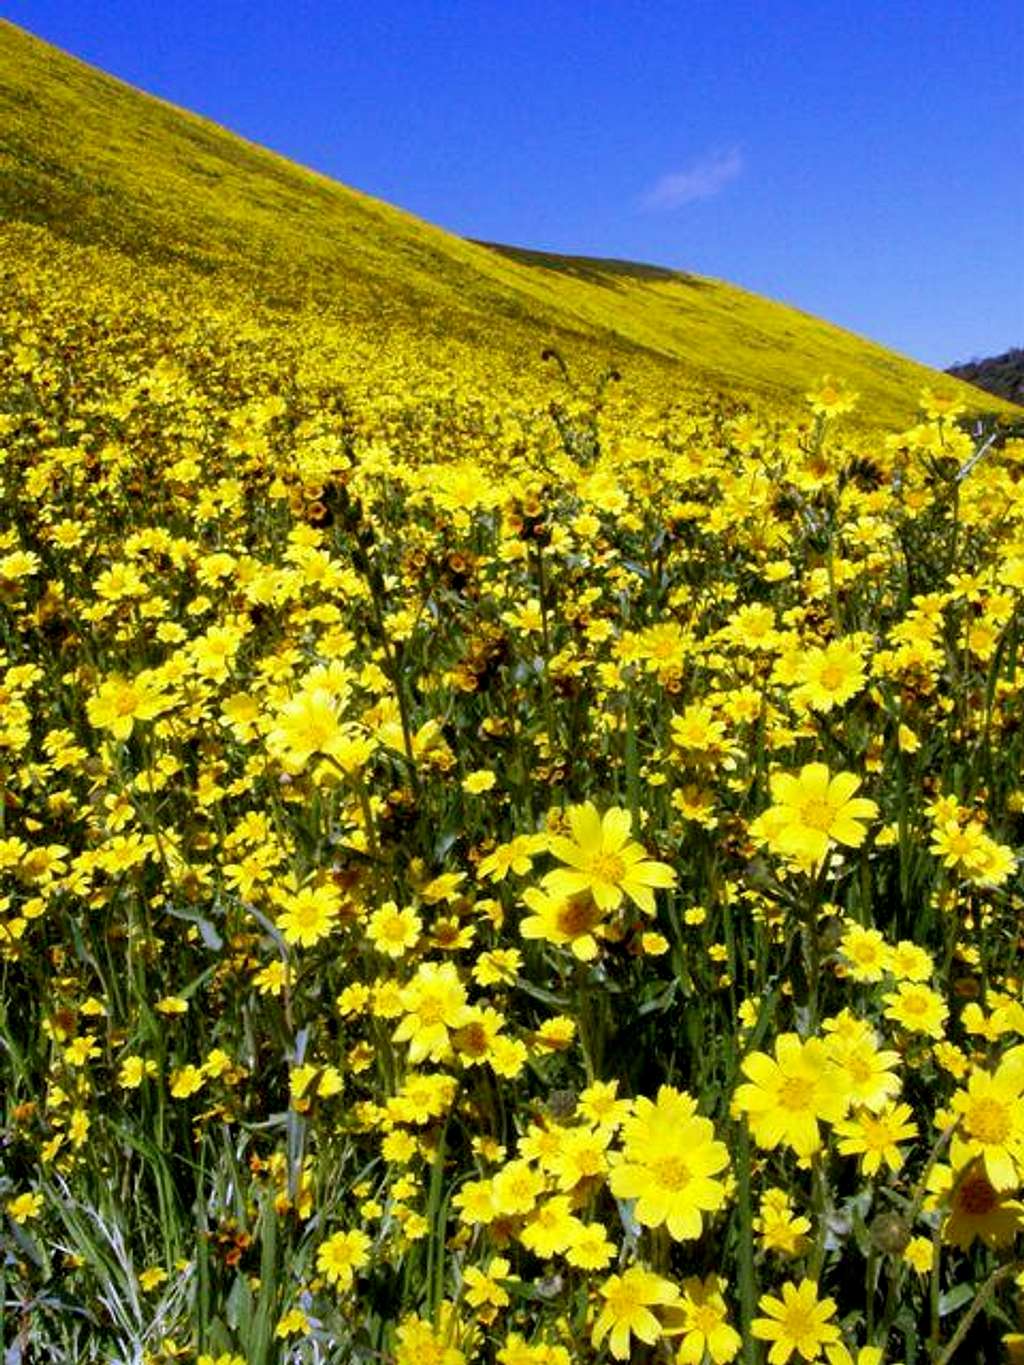 Coreopsis on the hills